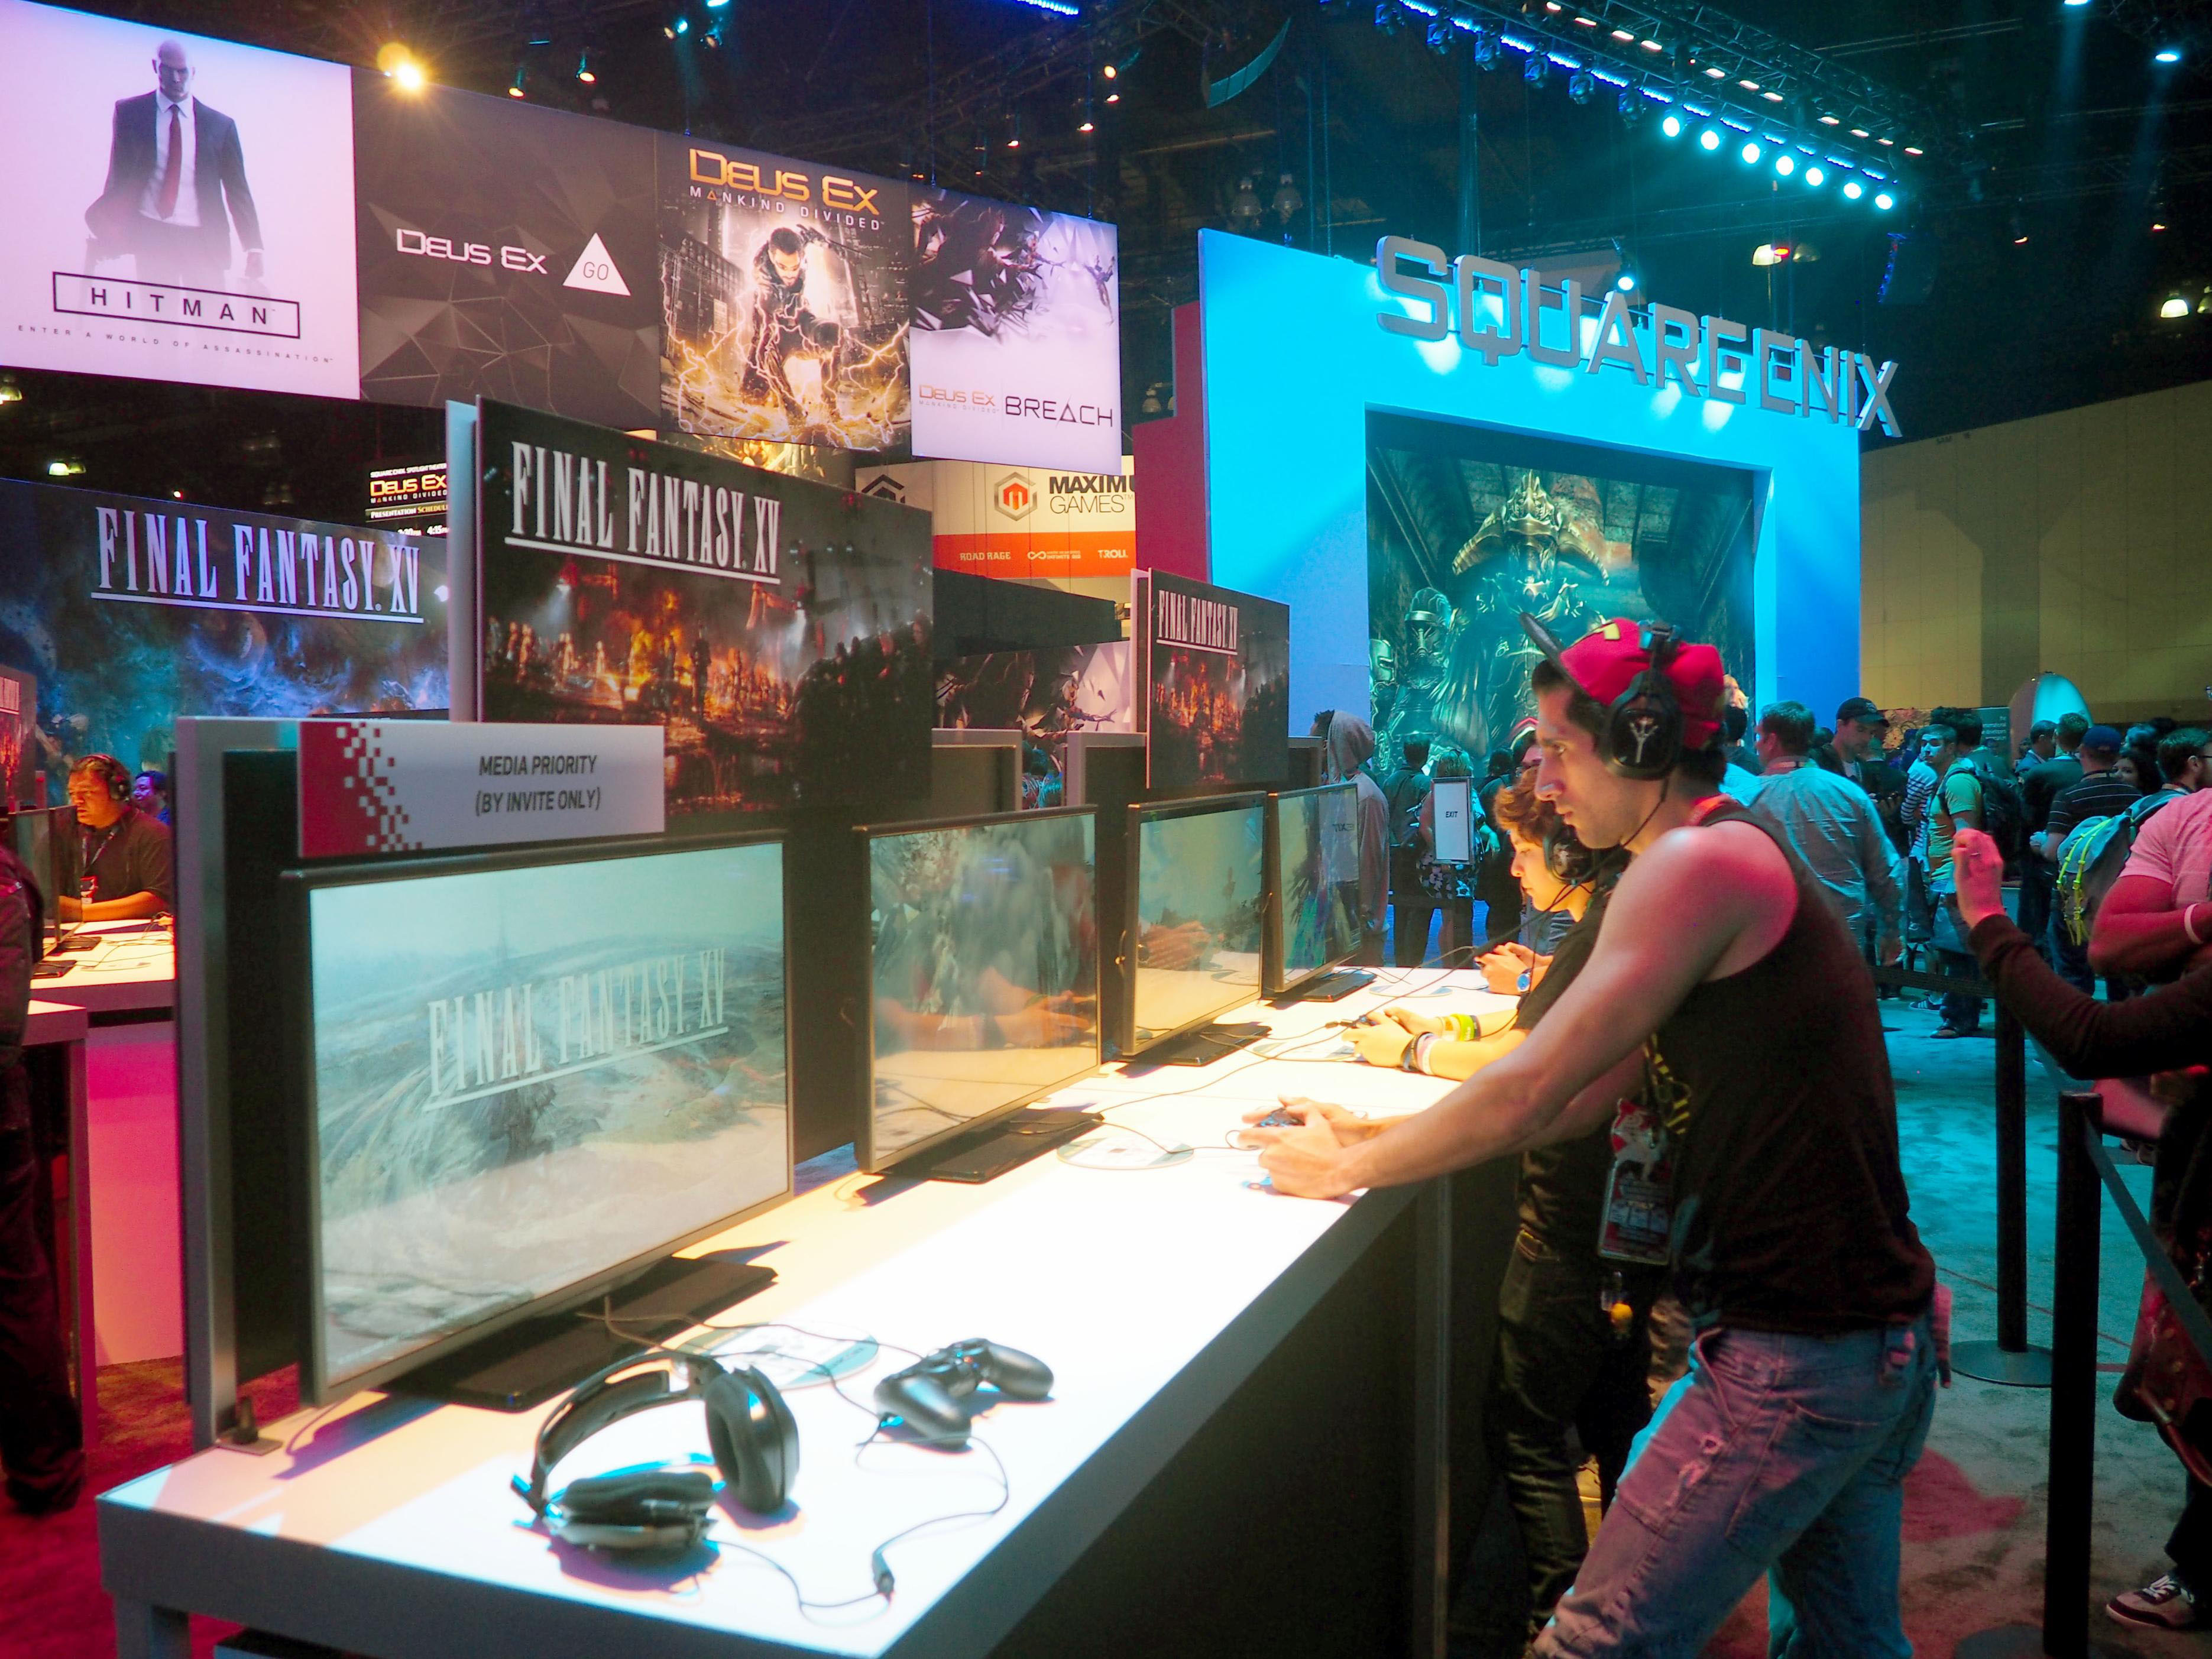 Visitors play 'Final Fantasy XV' on the opening day of the Electronics Entertainment Expo, one of the biggest showcases for new video games, in Los Angeles on June 14. | KYODO